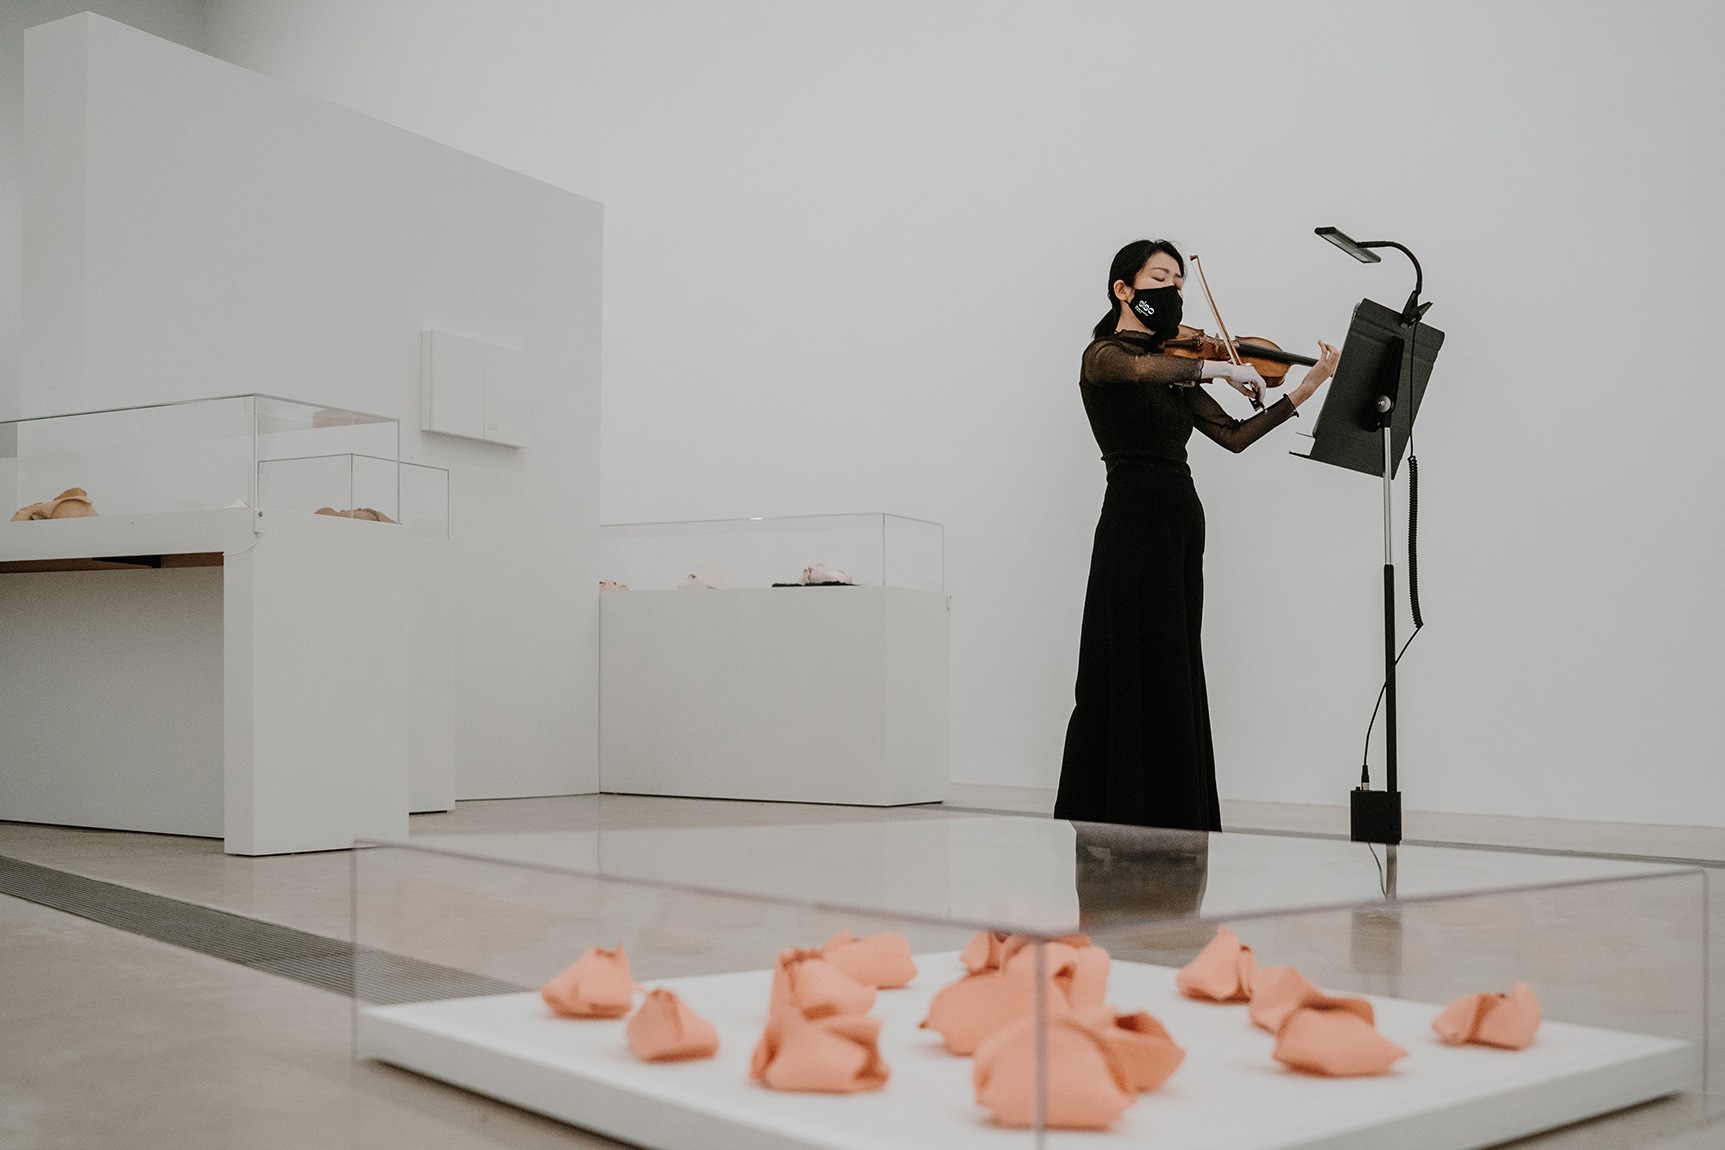 A violinist performs in the gallery, surrounded by the "Hannah Wilke: Art for Life's Sake" exhibition